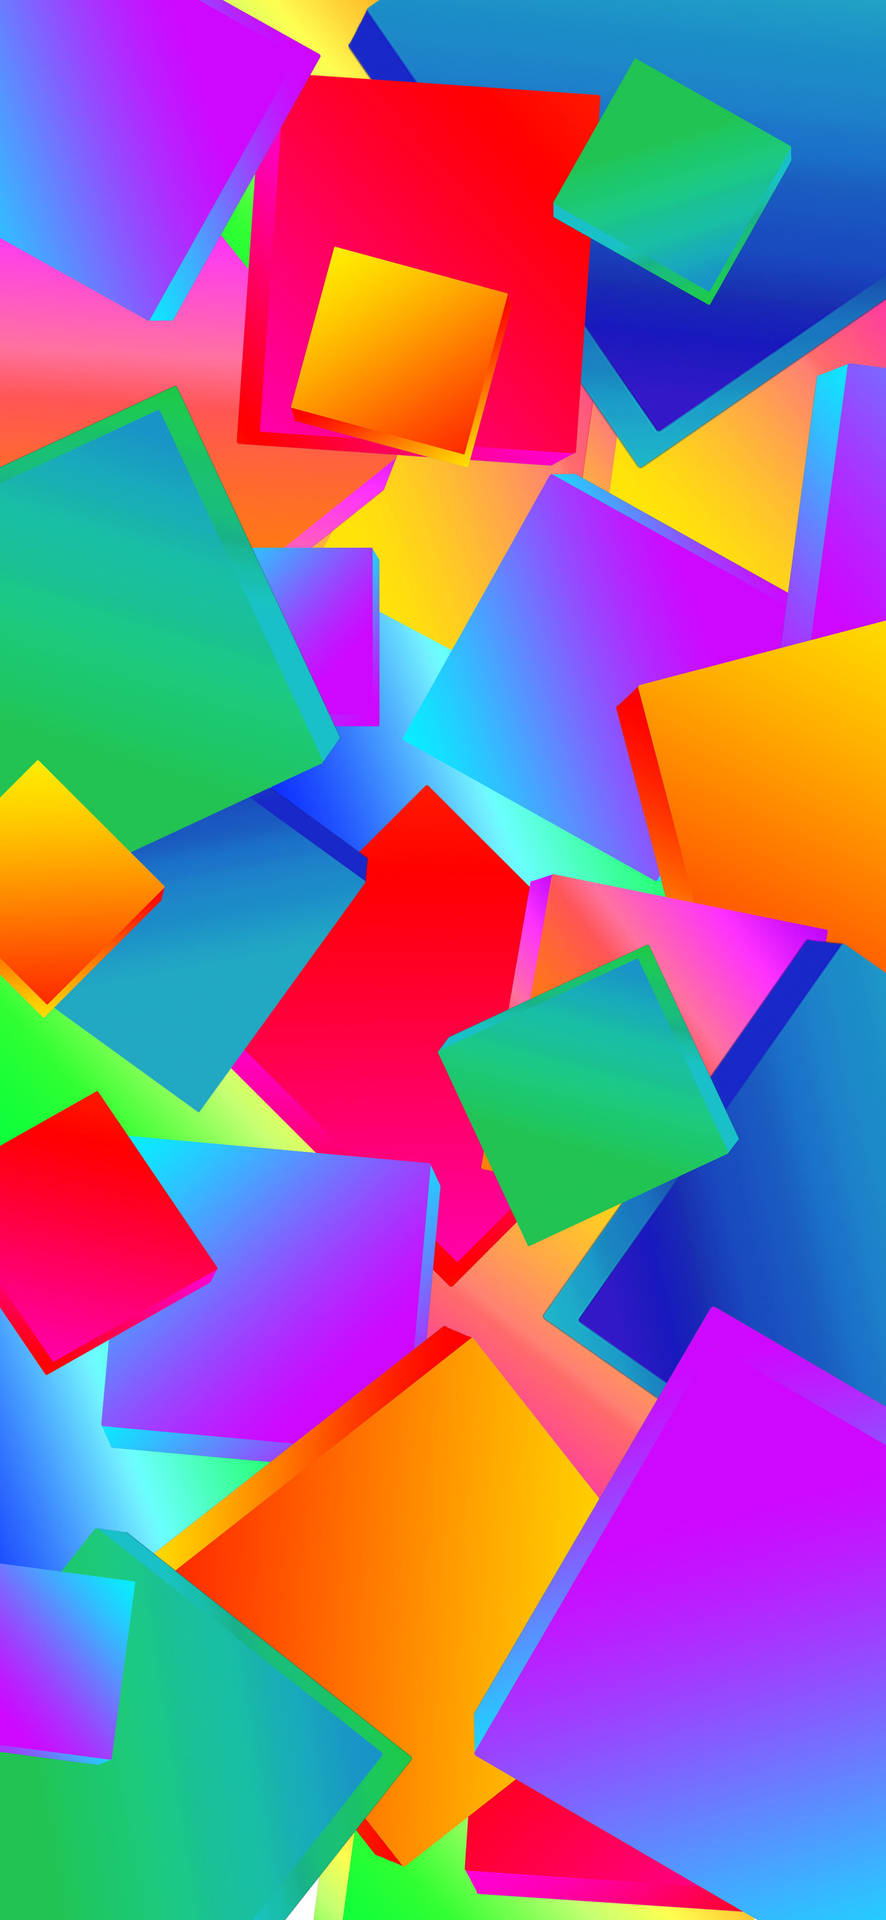 Colorful Cubes On Samsung Full Hd Wallpaper